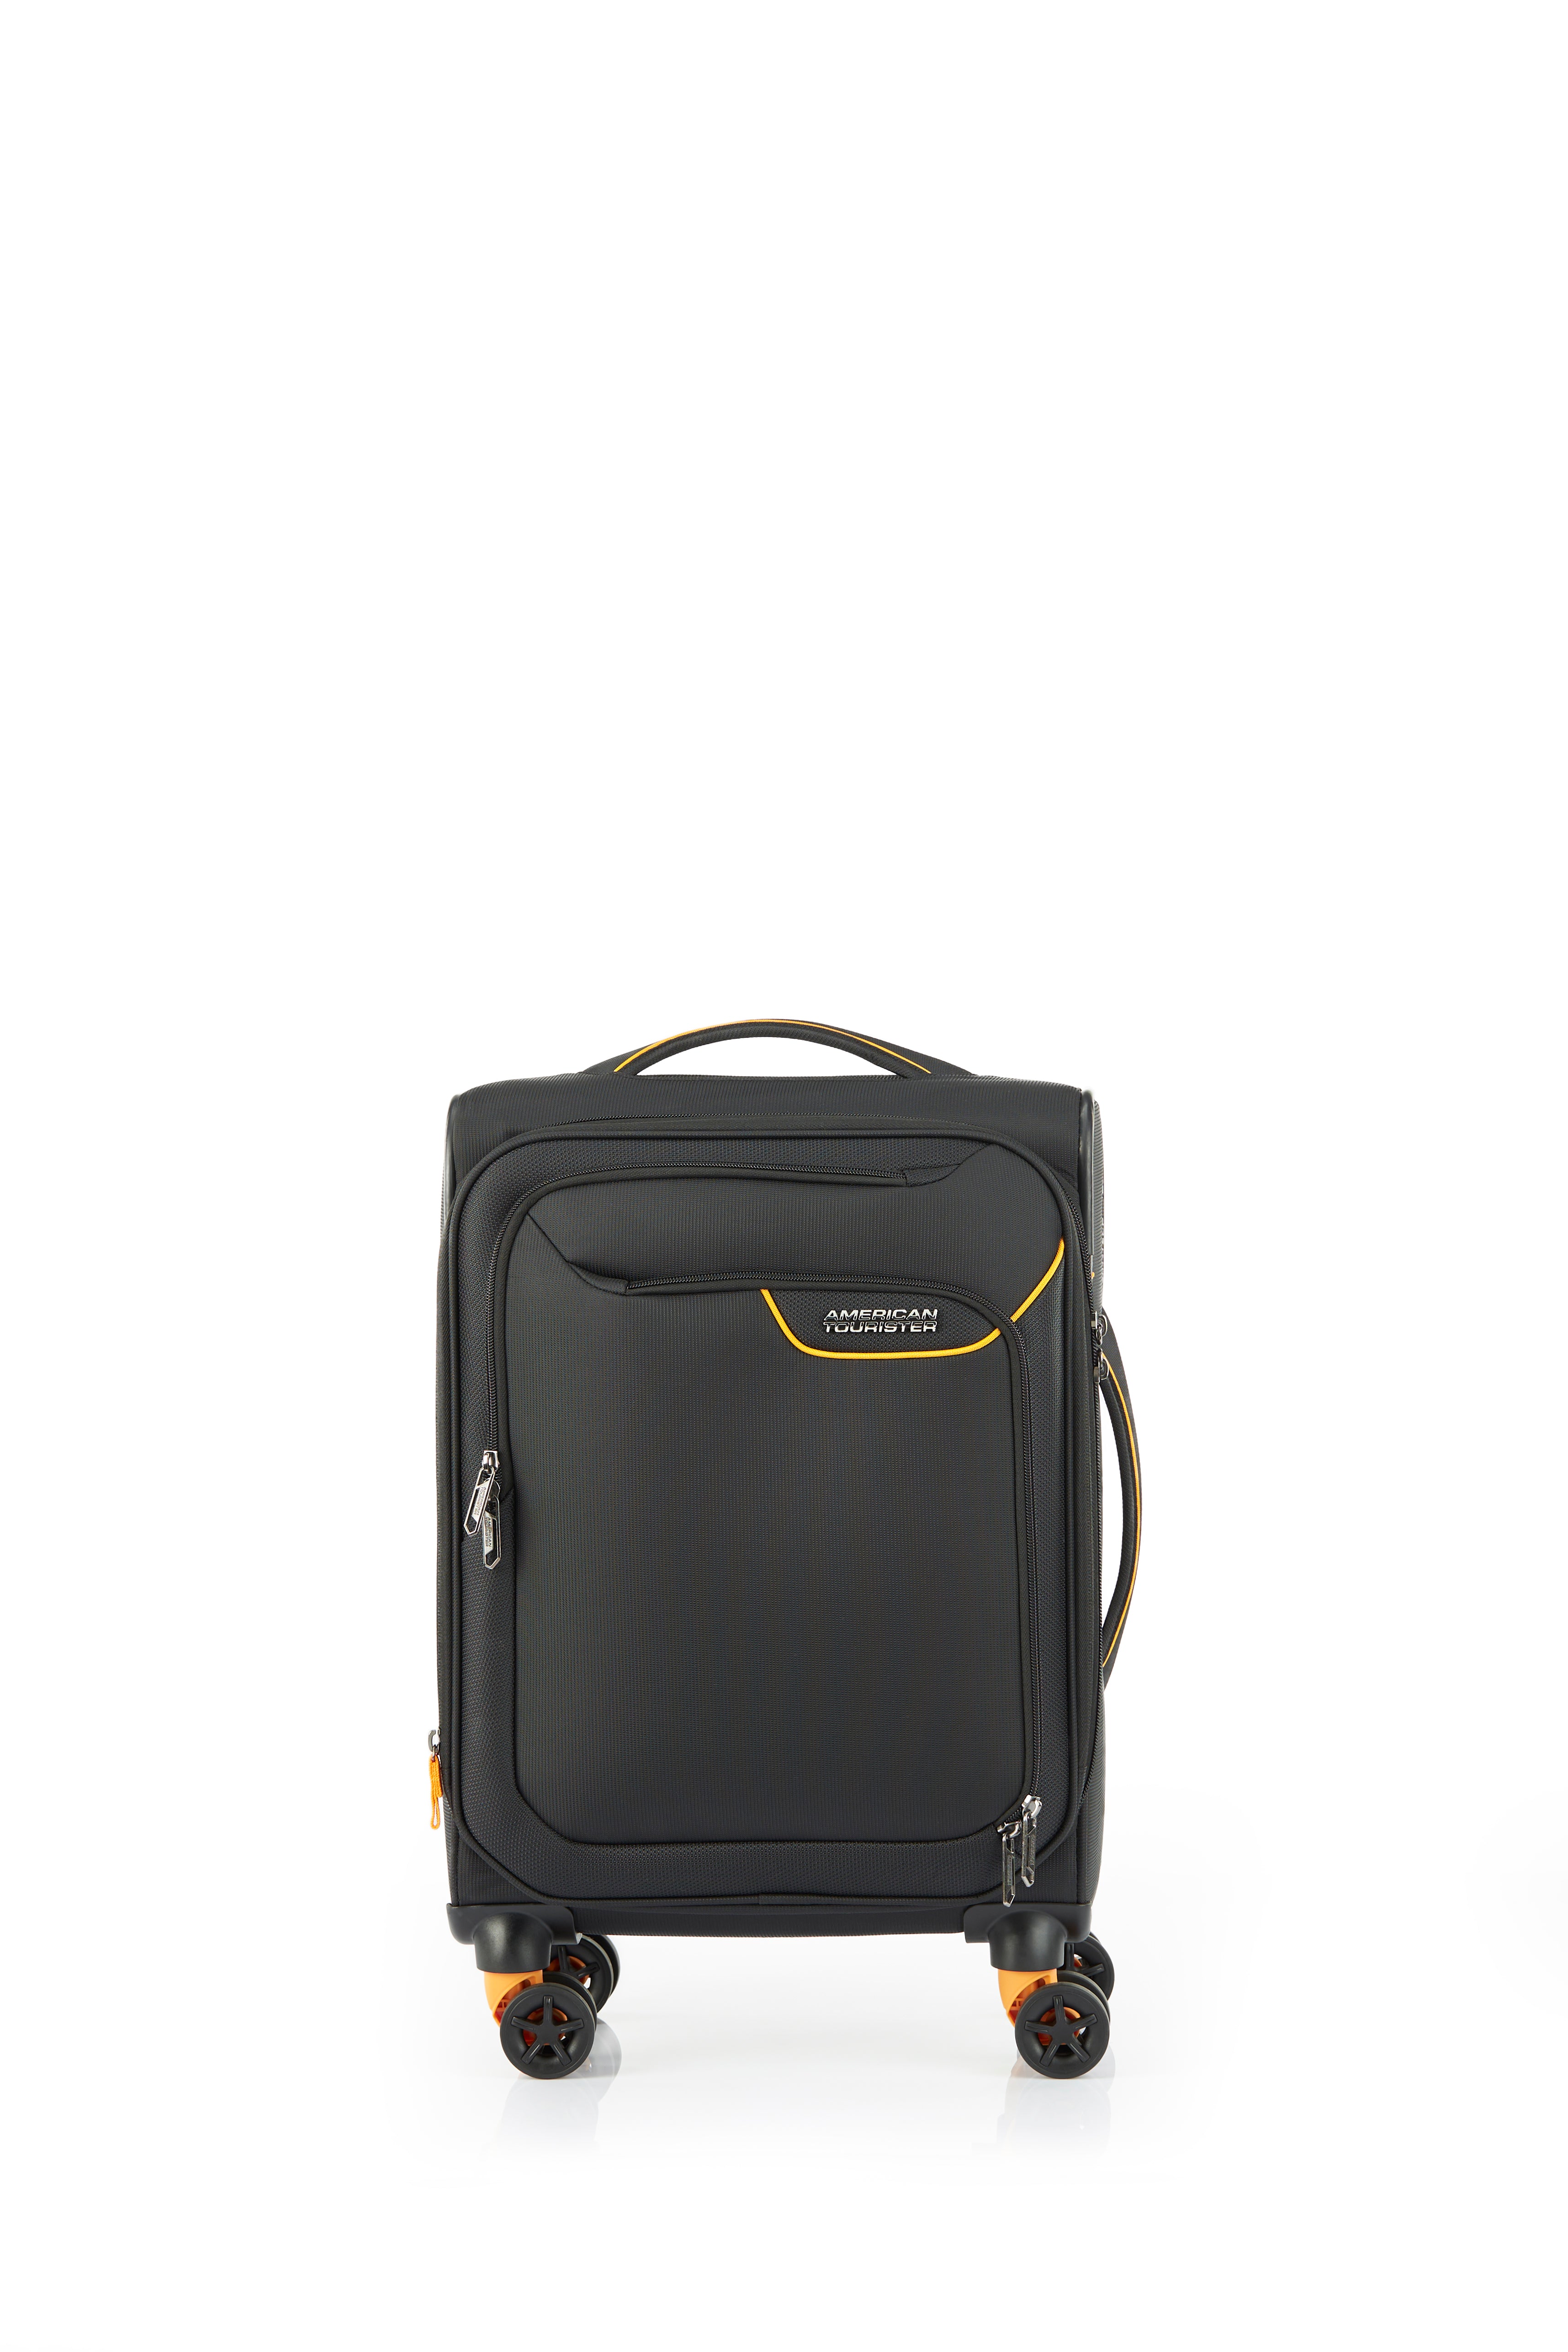 American Tourister - Applite ECO 55cm Small Suitcase - Black/Must-2